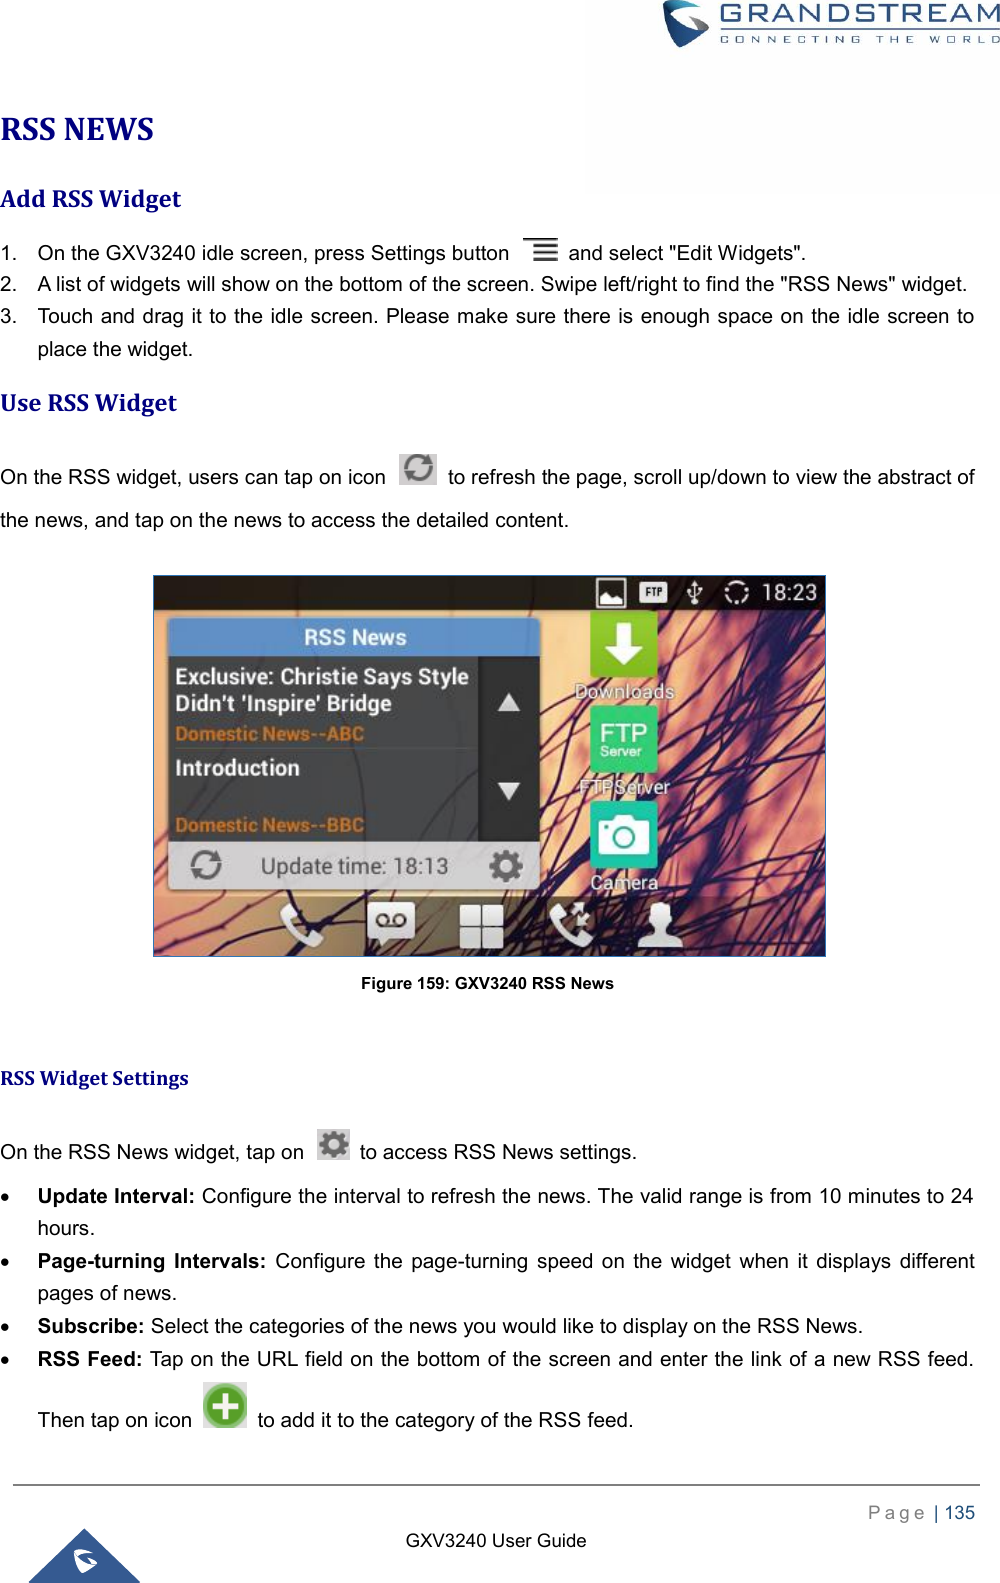    P a g e  | 135    GXV3240 User Guide  RSS NEWS Add RSS Widget 1.  On the GXV3240 idle screen, press Settings button    and select &quot;Edit Widgets&quot;. 2.  A list of widgets will show on the bottom of the screen. Swipe left/right to find the &quot;RSS News&quot; widget. 3.  Touch and drag it to the idle screen. Please make sure there is enough space on the idle screen to place the widget. Use RSS Widget On the RSS widget, users can tap on icon    to refresh the page, scroll up/down to view the abstract of the news, and tap on the news to access the detailed content.   Figure 159: GXV3240 RSS News  RSS Widget Settings On the RSS News widget, tap on    to access RSS News settings.  Update Interval: Configure the interval to refresh the news. The valid range is from 10 minutes to 24 hours.  Page-turning  Intervals: Configure  the  page-turning  speed  on  the  widget  when  it displays  different pages of news.  Subscribe: Select the categories of the news you would like to display on the RSS News.  RSS Feed: Tap on the URL field on the bottom of the screen and enter the link of a new RSS feed. Then tap on icon    to add it to the category of the RSS feed. 